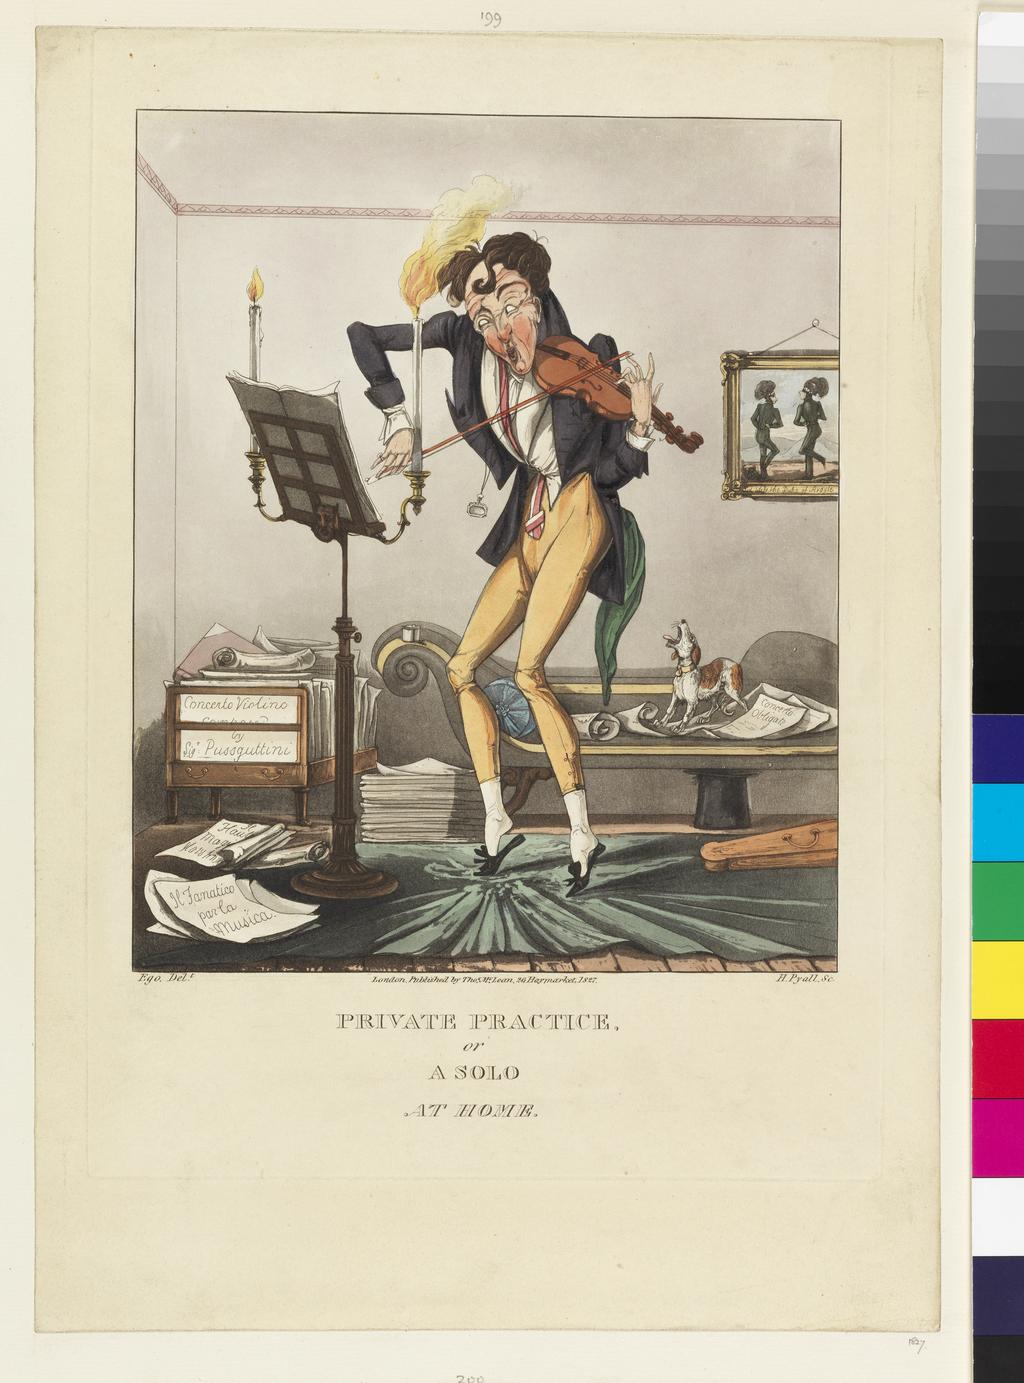 An image of Print album. Private Practice or a solo at home. Pyall, H,; printmaker (British, 1795-1833). McLean, Thomas, publisher (British, 1788-1859). Egerton, M., draughtsman, after (British, fl.1821-1827). Etching, aquatint, with hand colouring, 1827.